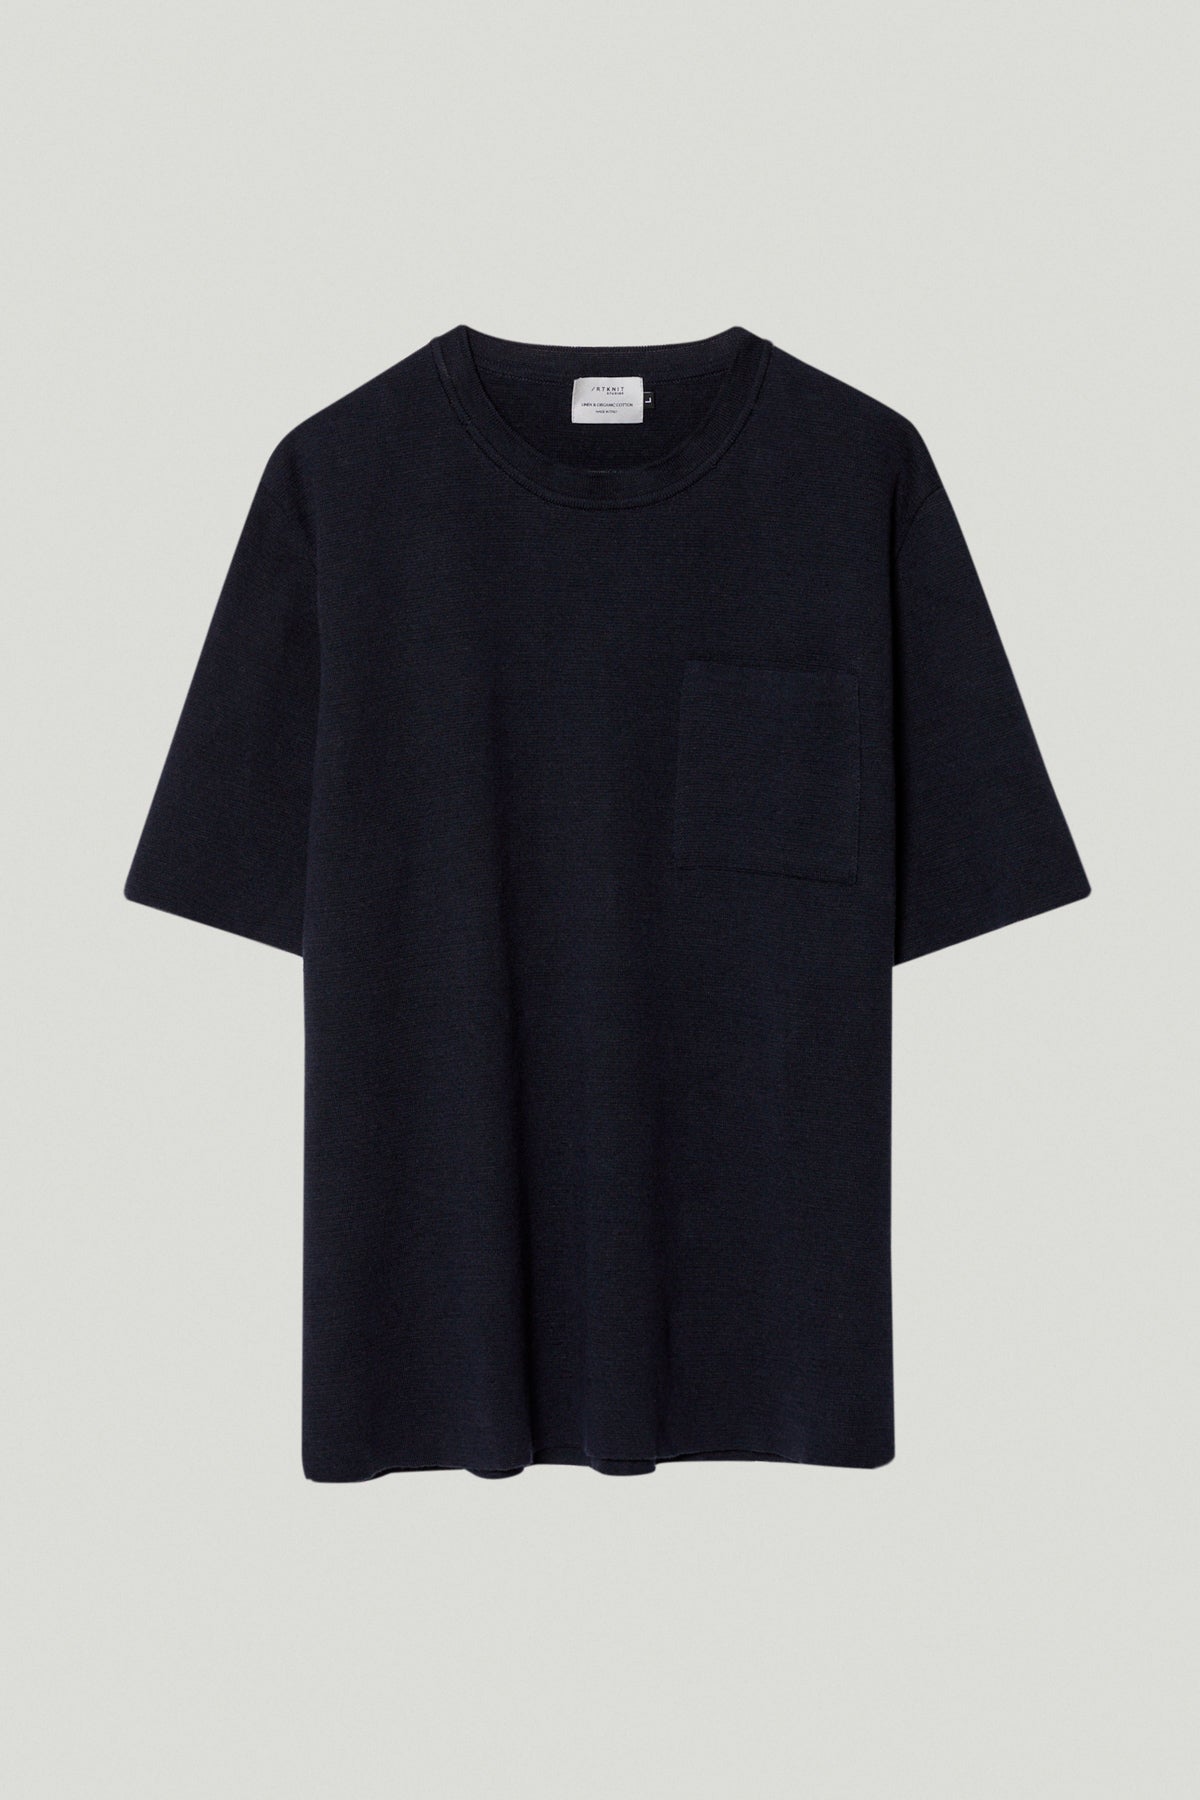 the linen cotton relaxed fit t shirt blue navy